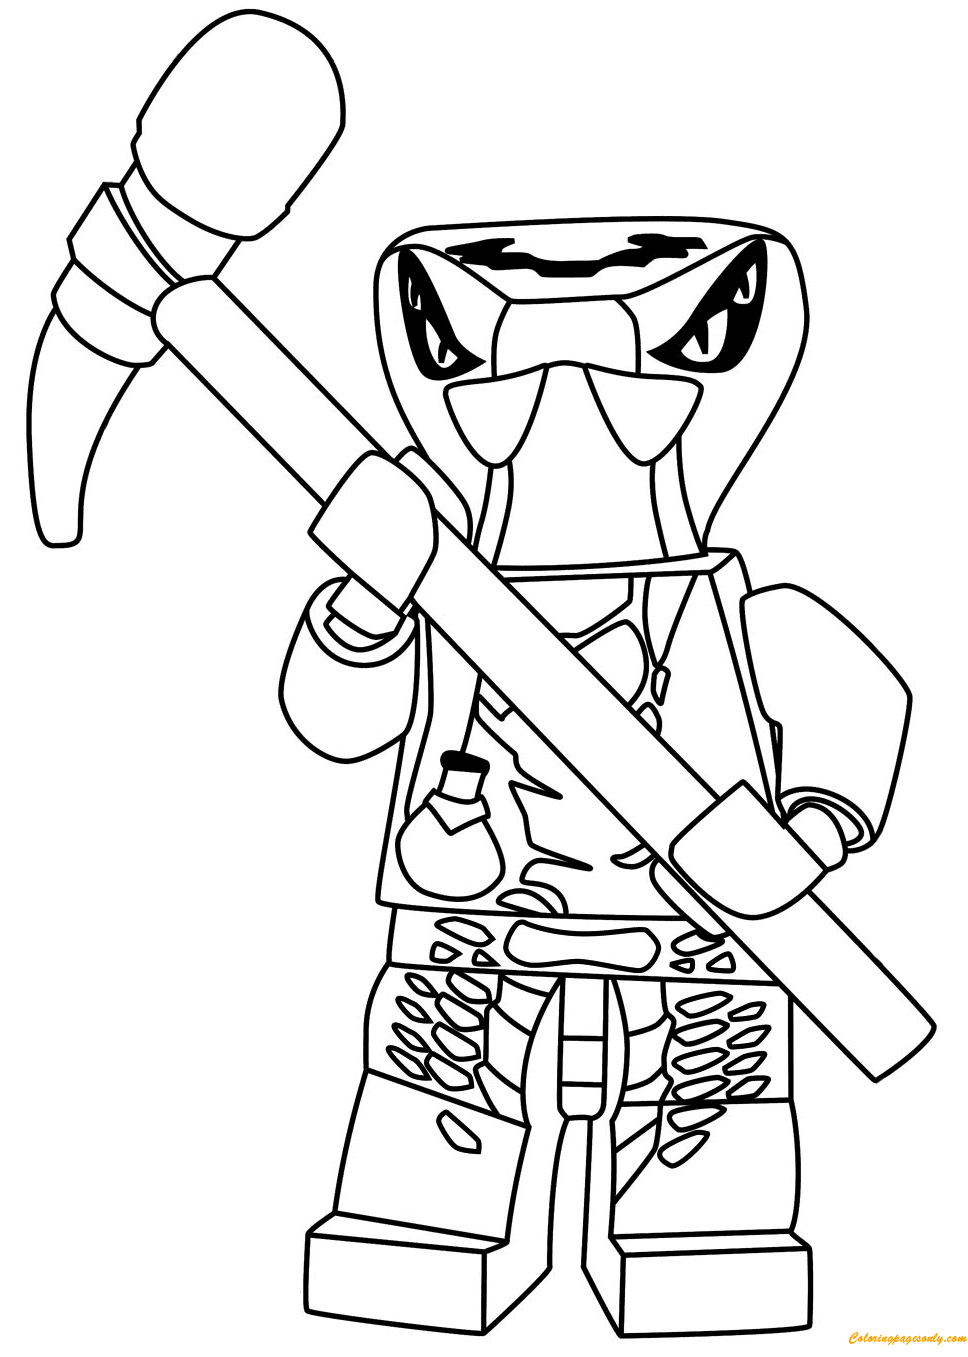 Download Lego Ninjago Spitta Snake Coloring Pages - Toys and Dolls Coloring Pages - Free Printable ...